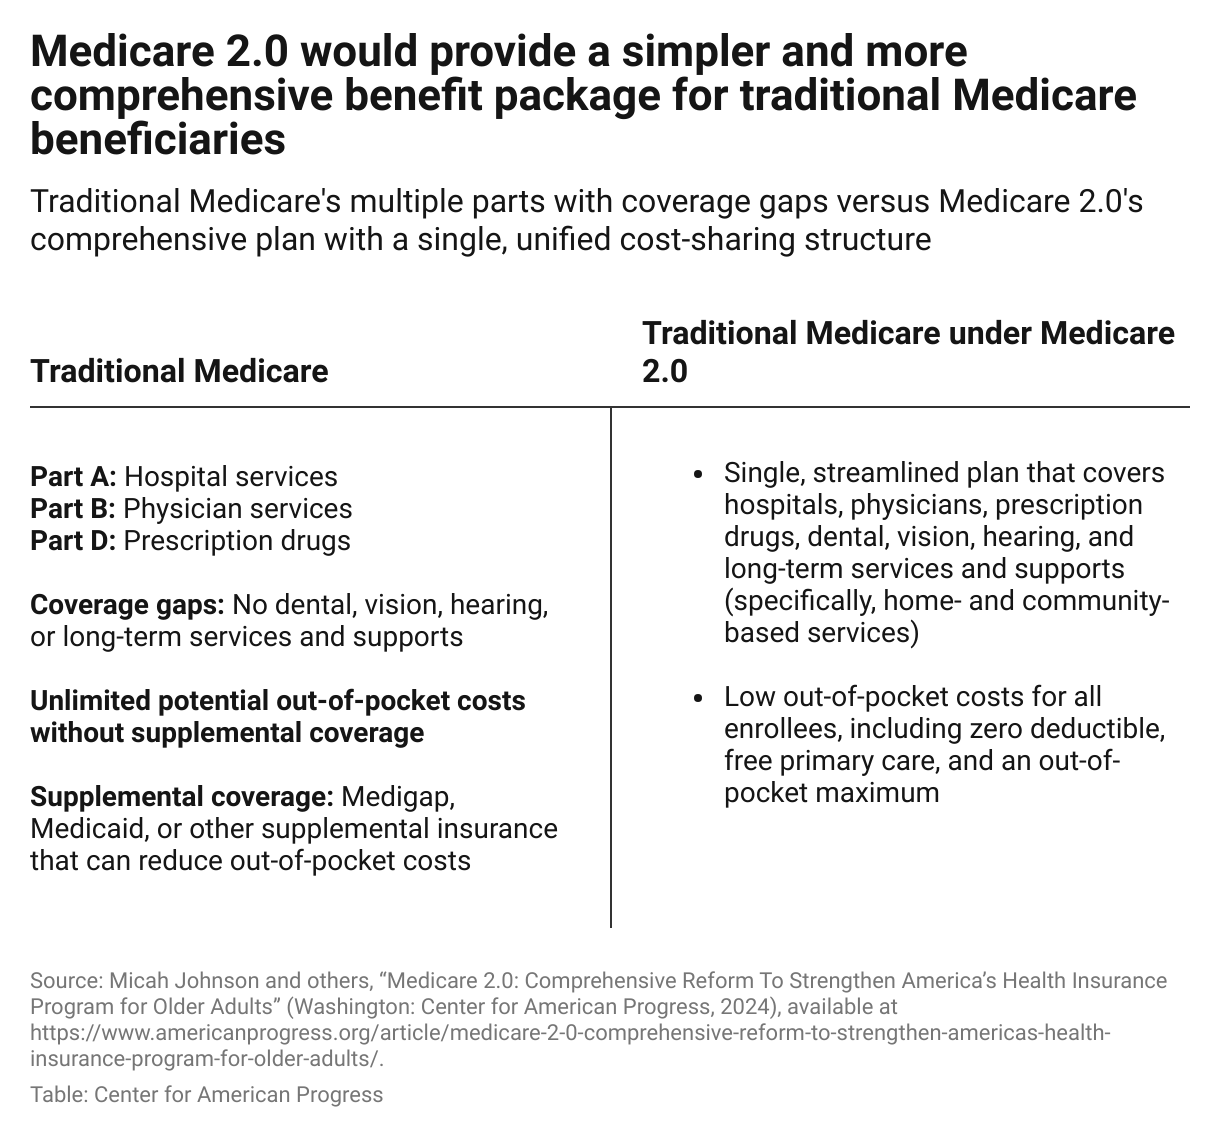 A table comparing the multiple plans of traditional Medicare with the simpler and more comprehensive benefit package with less coverage gaps that beneficiaries would receive under Medicare 2.0.